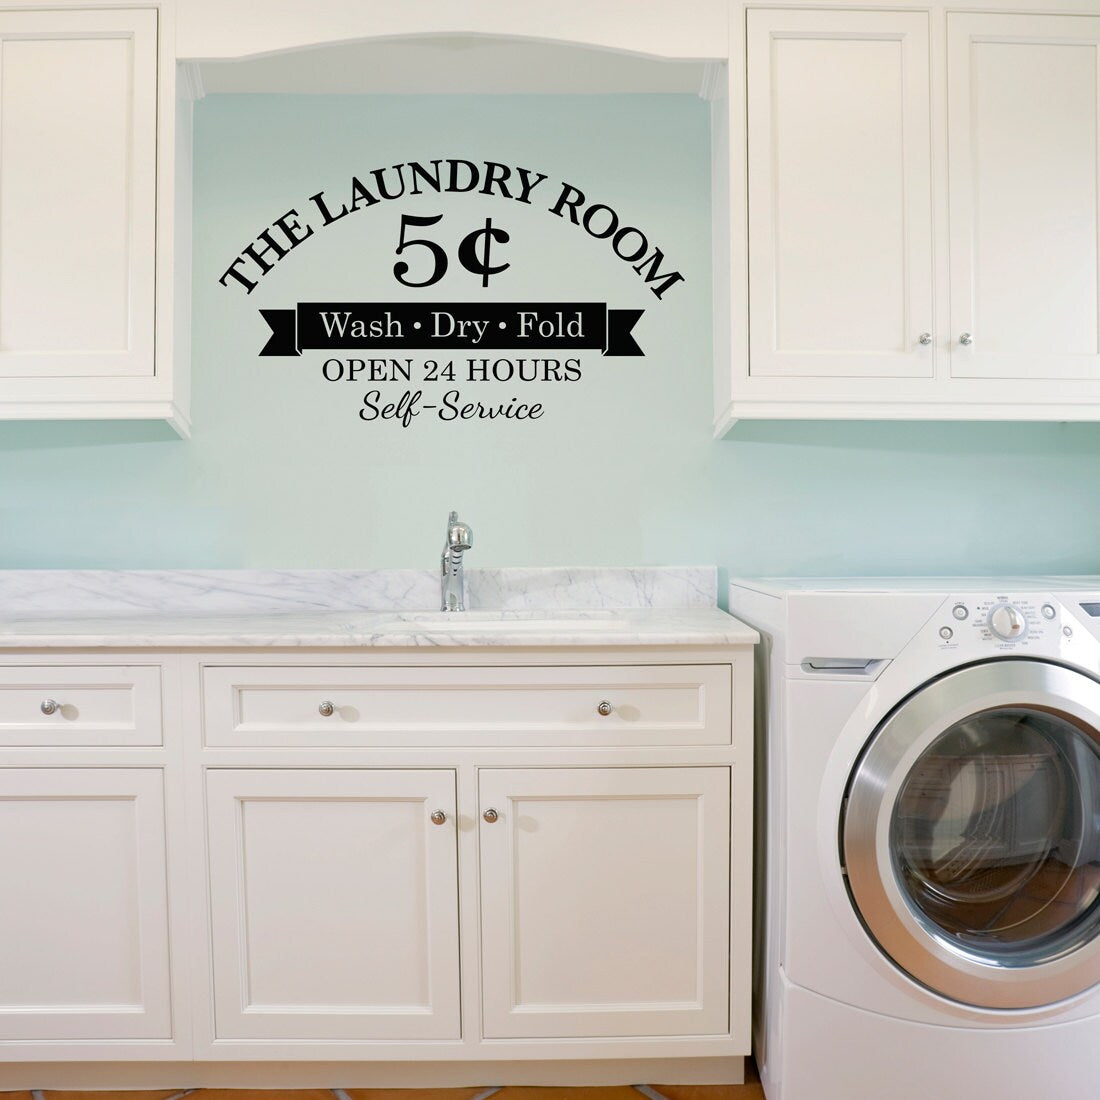 Laundry Room Decal - Wash Dry Fold - 5 Cents - Open 24 Hours - Self-Service